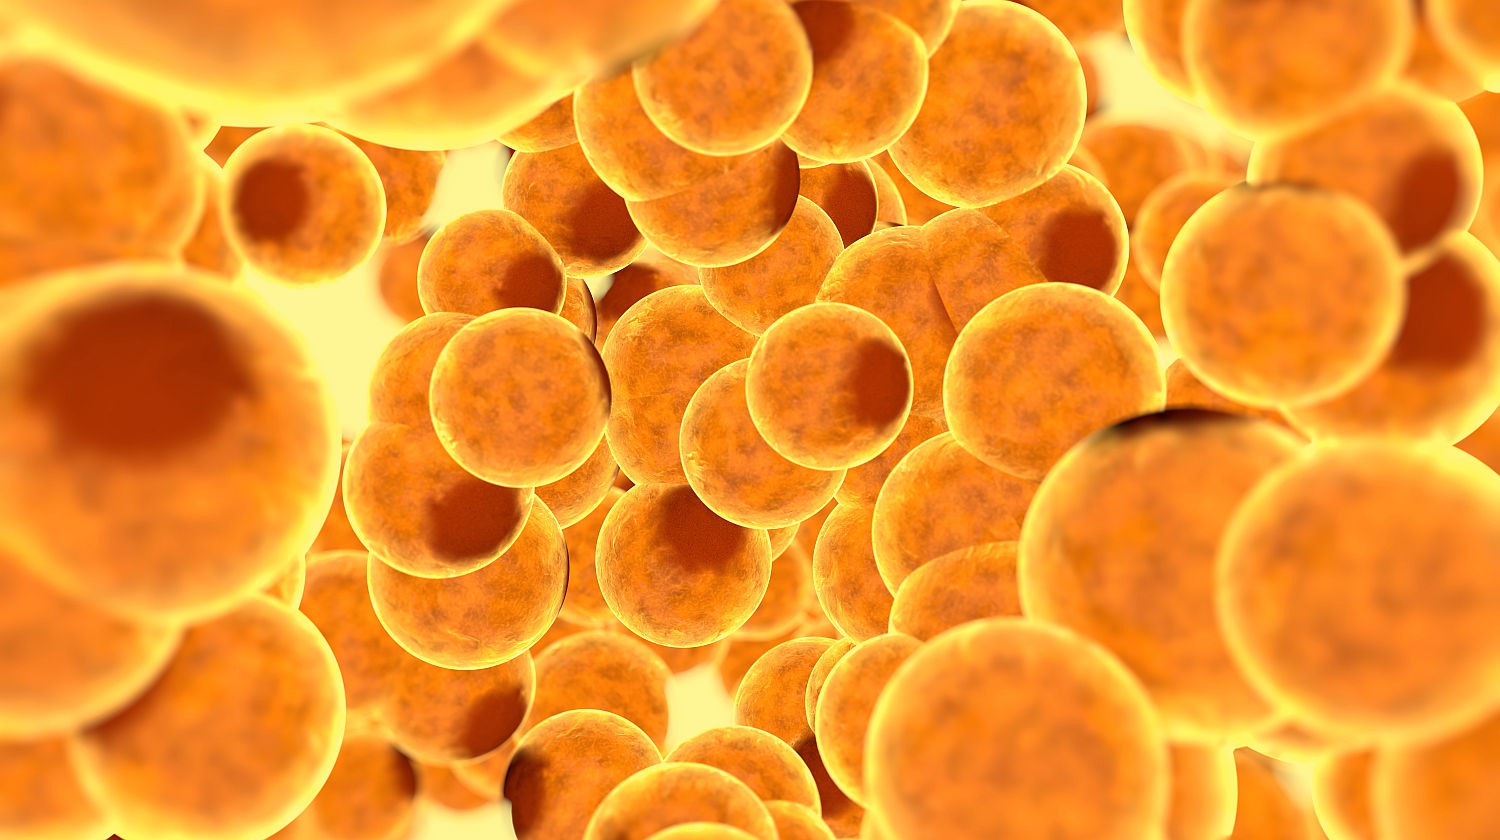 Bloated Fat Cells: Overflowing With Inflammation?